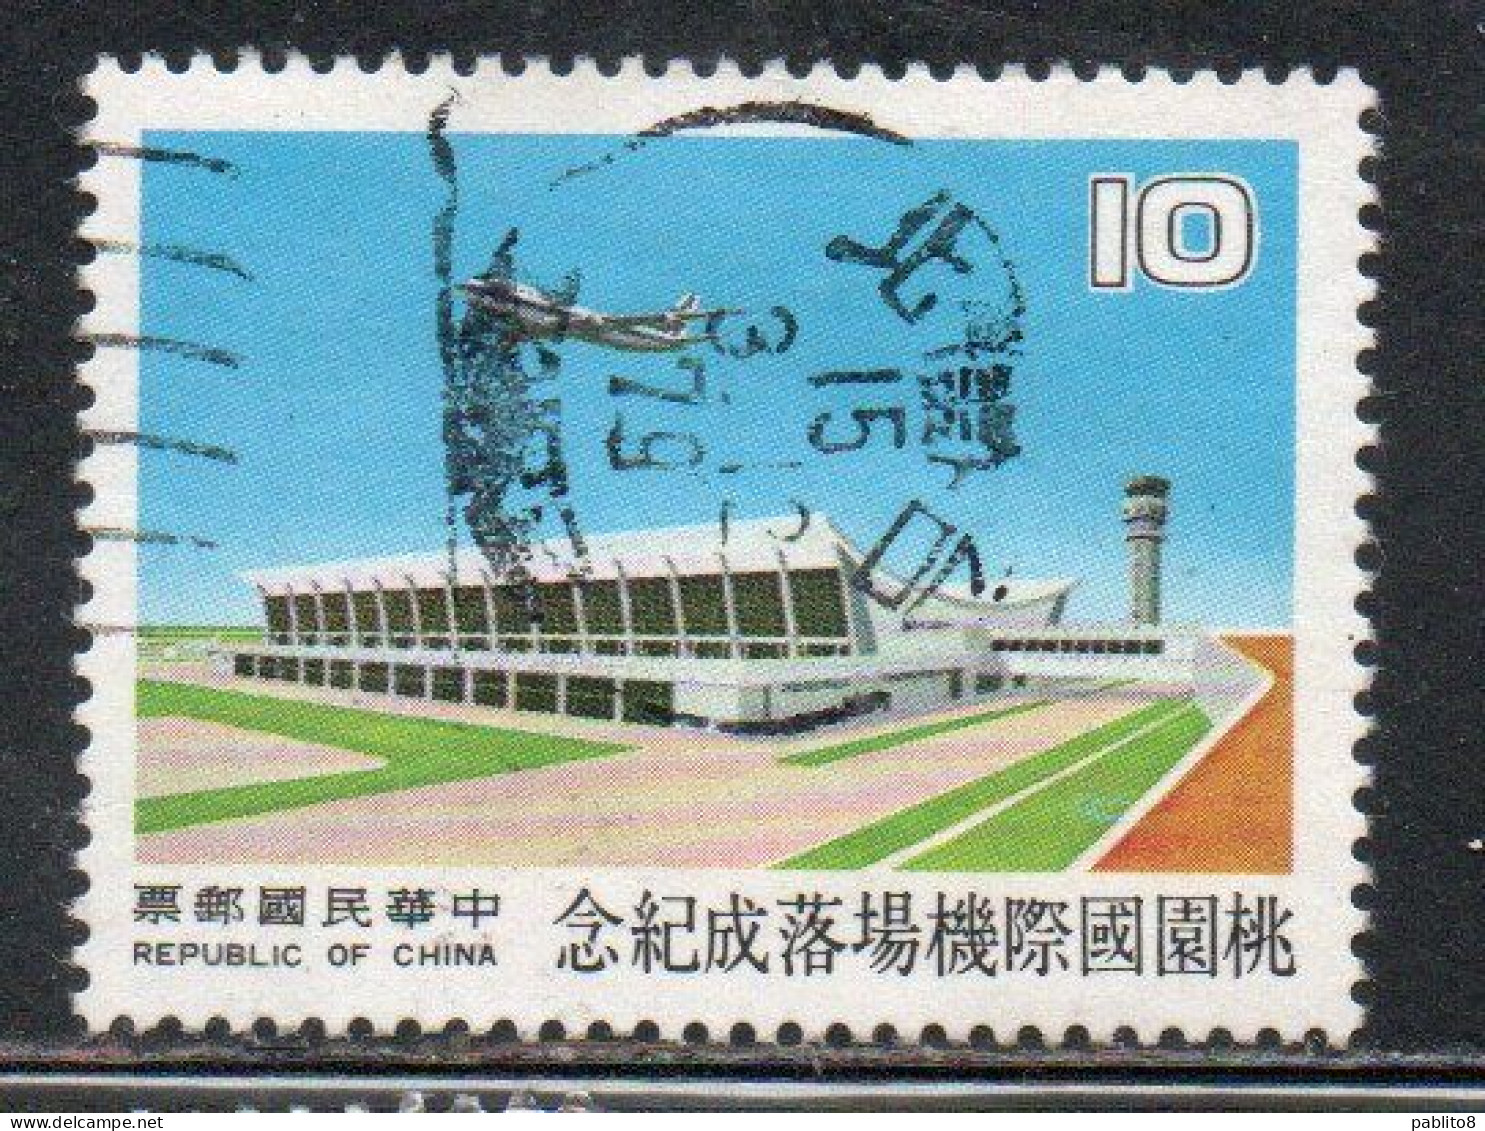 CHINA REPUBLIC CINA TAIWAN FORMOSA 1978 TAOYUAN AIRPORT PASSENGER TERMINAL CONTROL TOWER 10$ USED USATO OBLITERE - Oblitérés